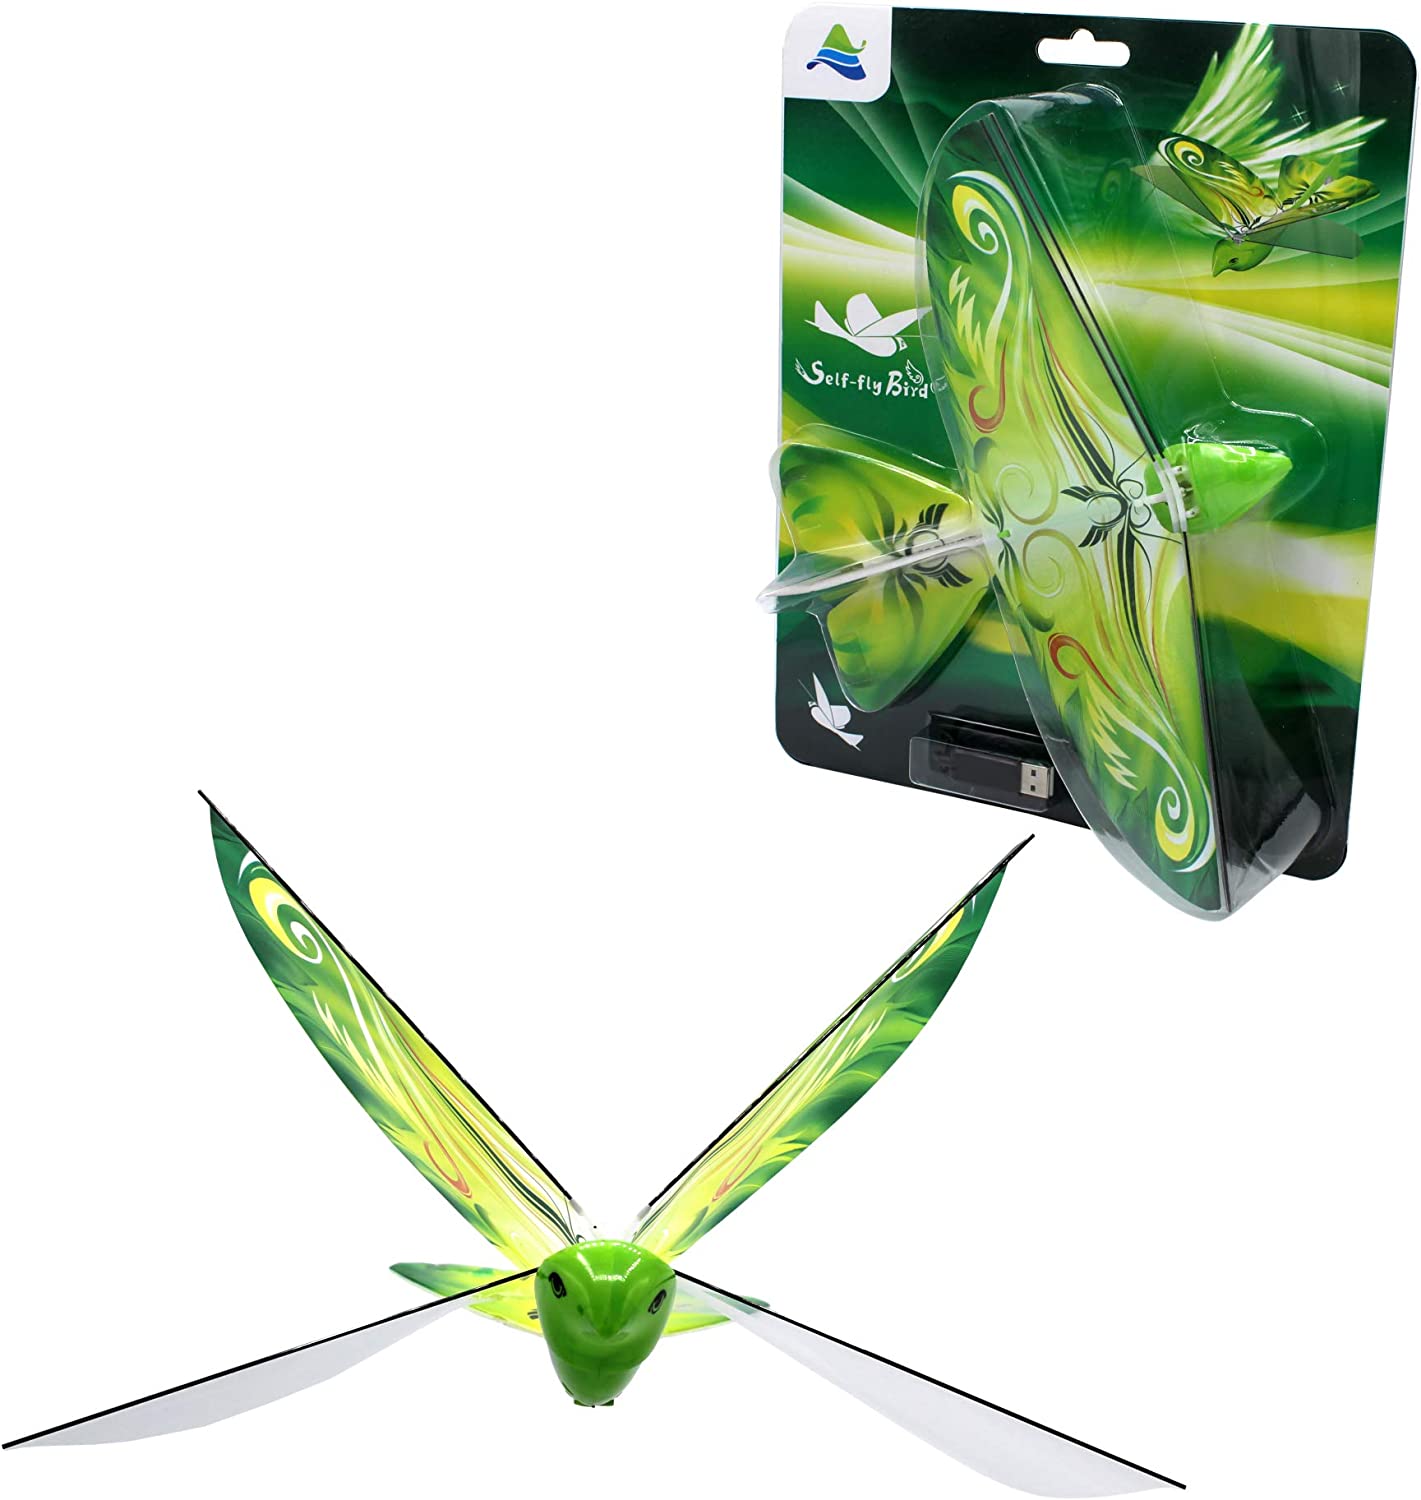 MUKIKIM Self Flying eBird Green Parrot – Electronic Flying Bird Toy Drone. Adjust The Rudder to Make The Flapping Wings Bird Fly Forward and Back to You. 3 Flying Models! No Remote Command Needed